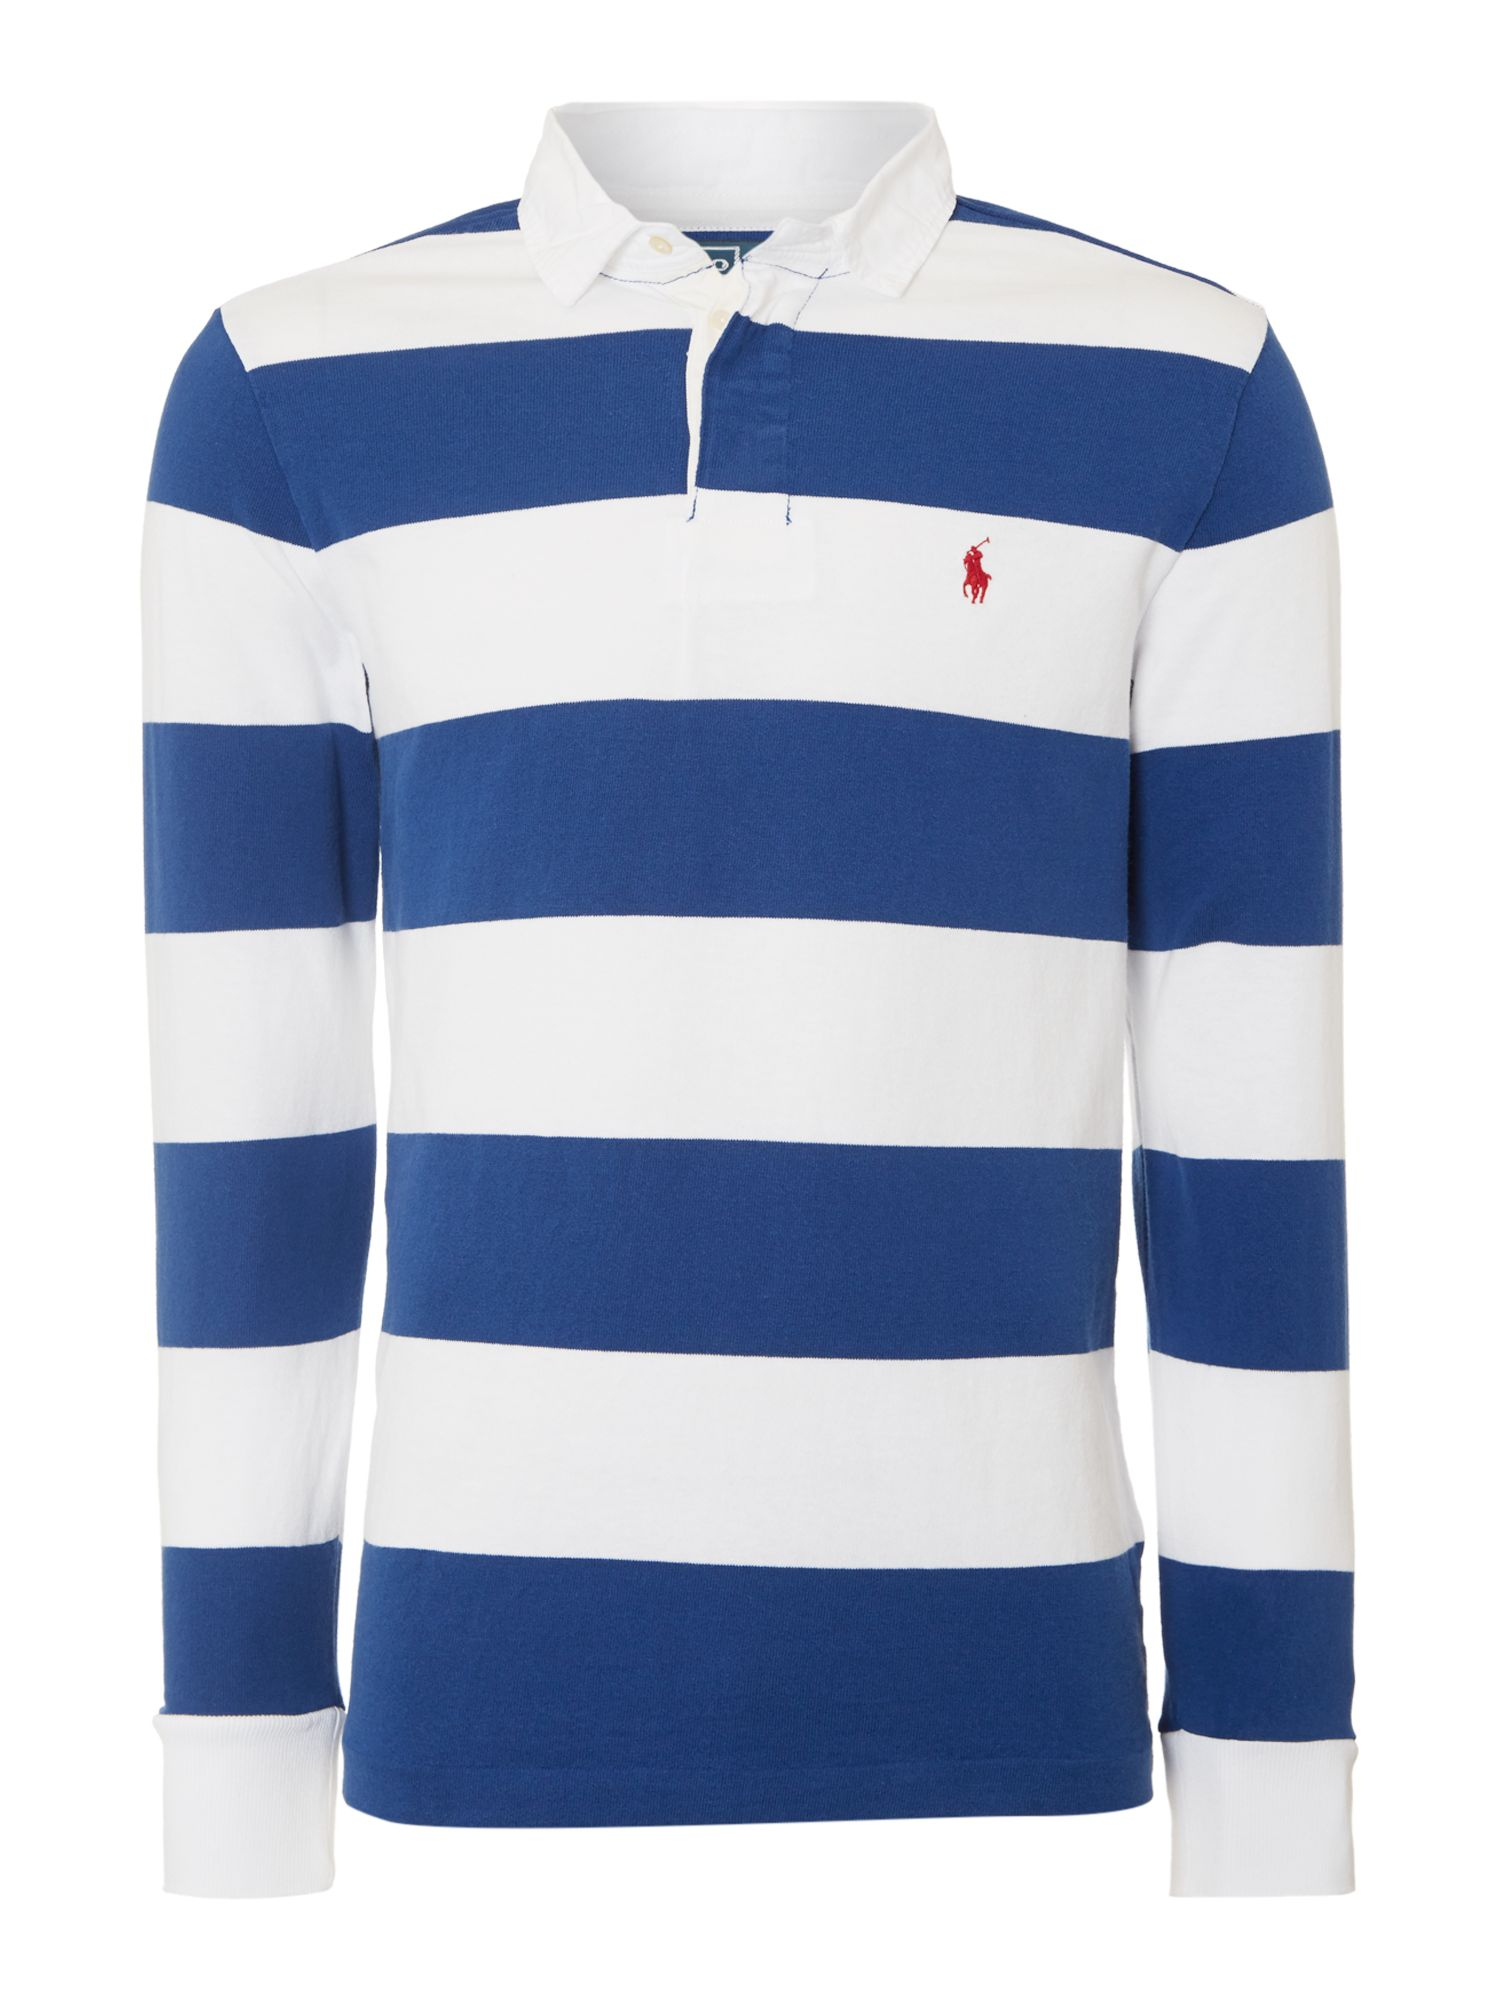 Polo ralph lauren Custom Fit Striped Rugby Shirt in Blue ...